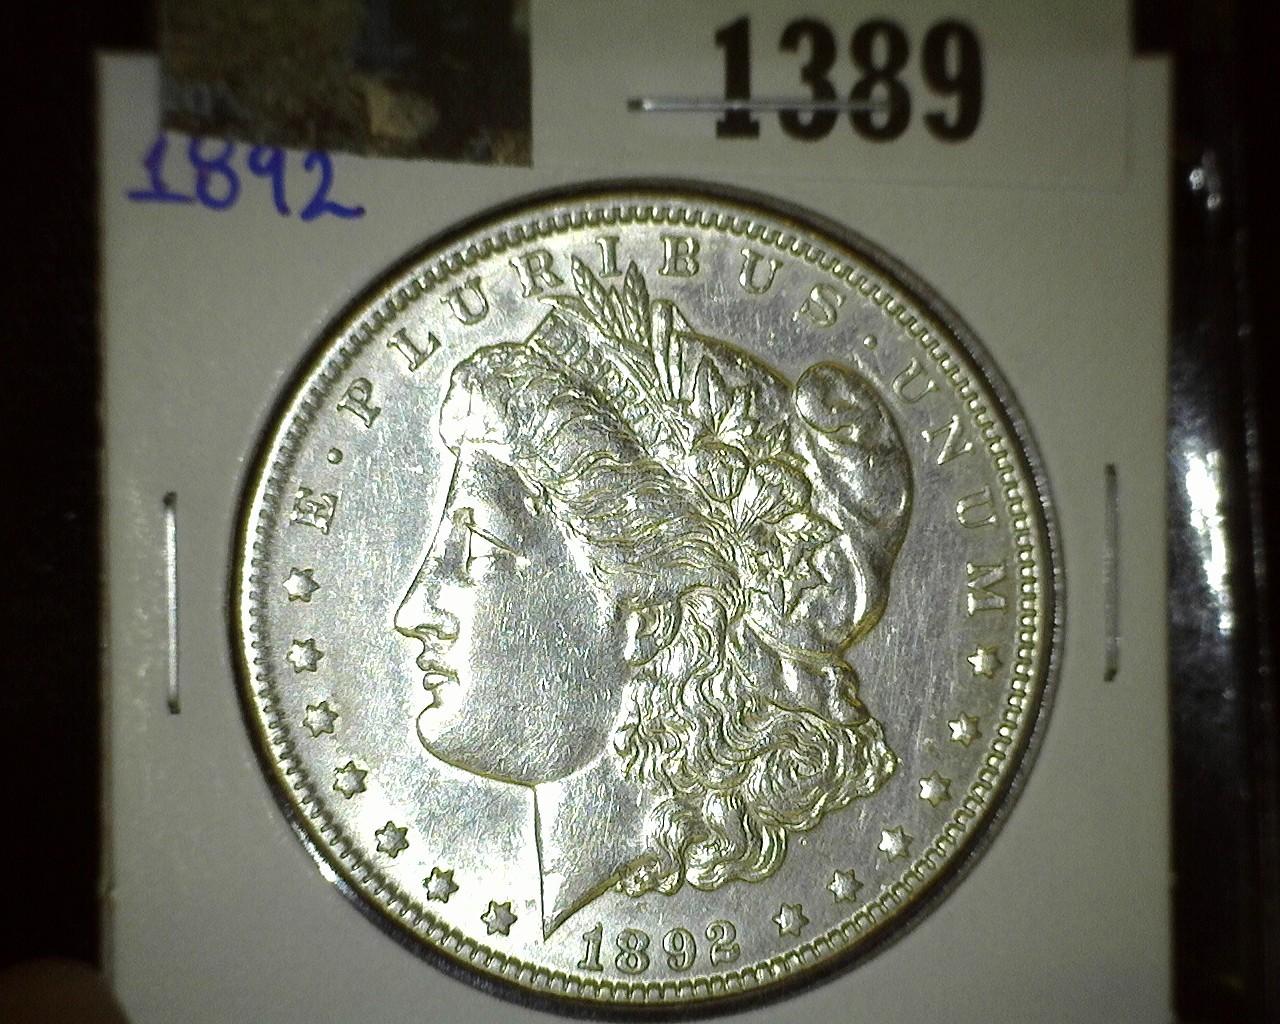 1892 P Morgan Silver Dollar, very scarce and quite flashy.